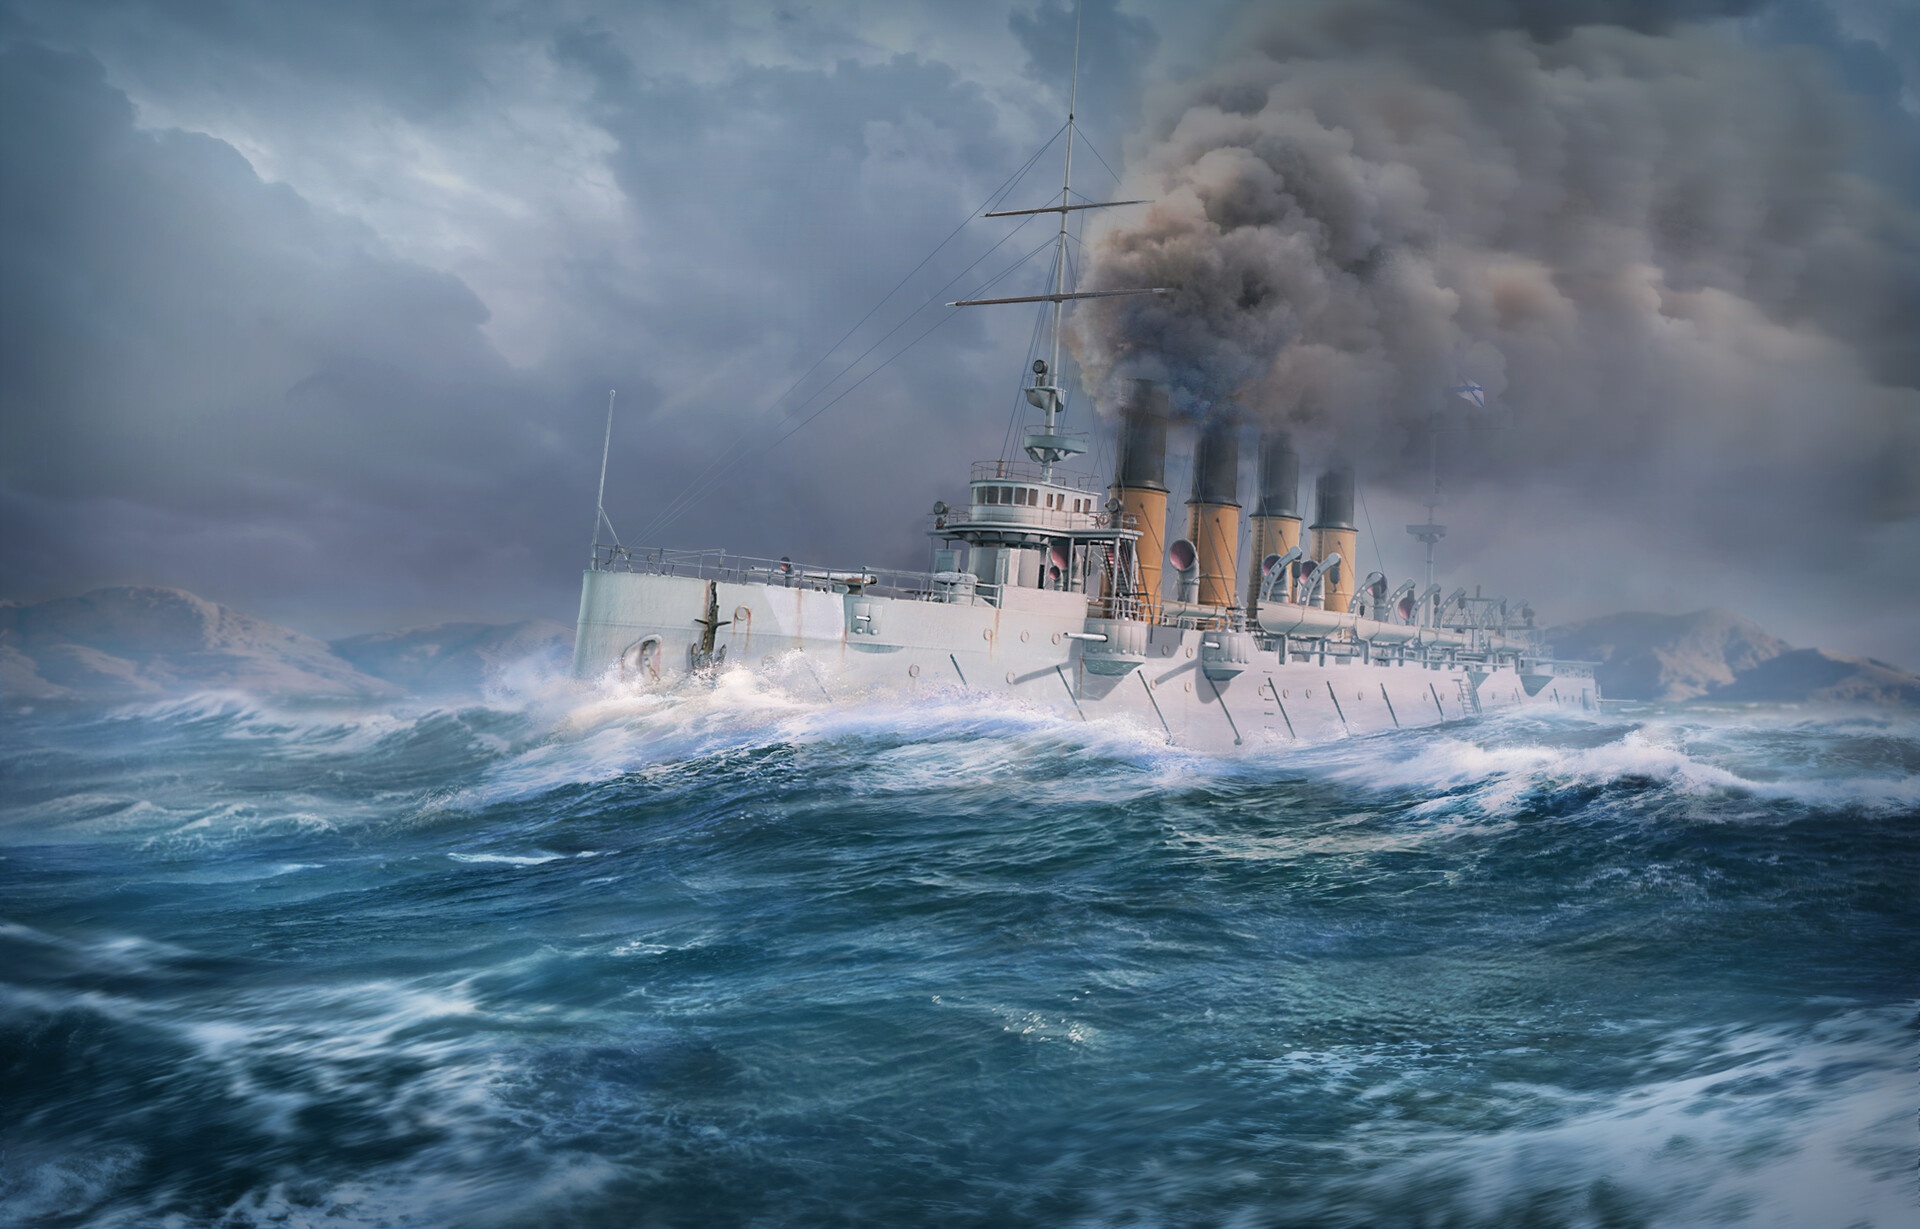 Video Game World of Warships HD Wallpaper | Background Image